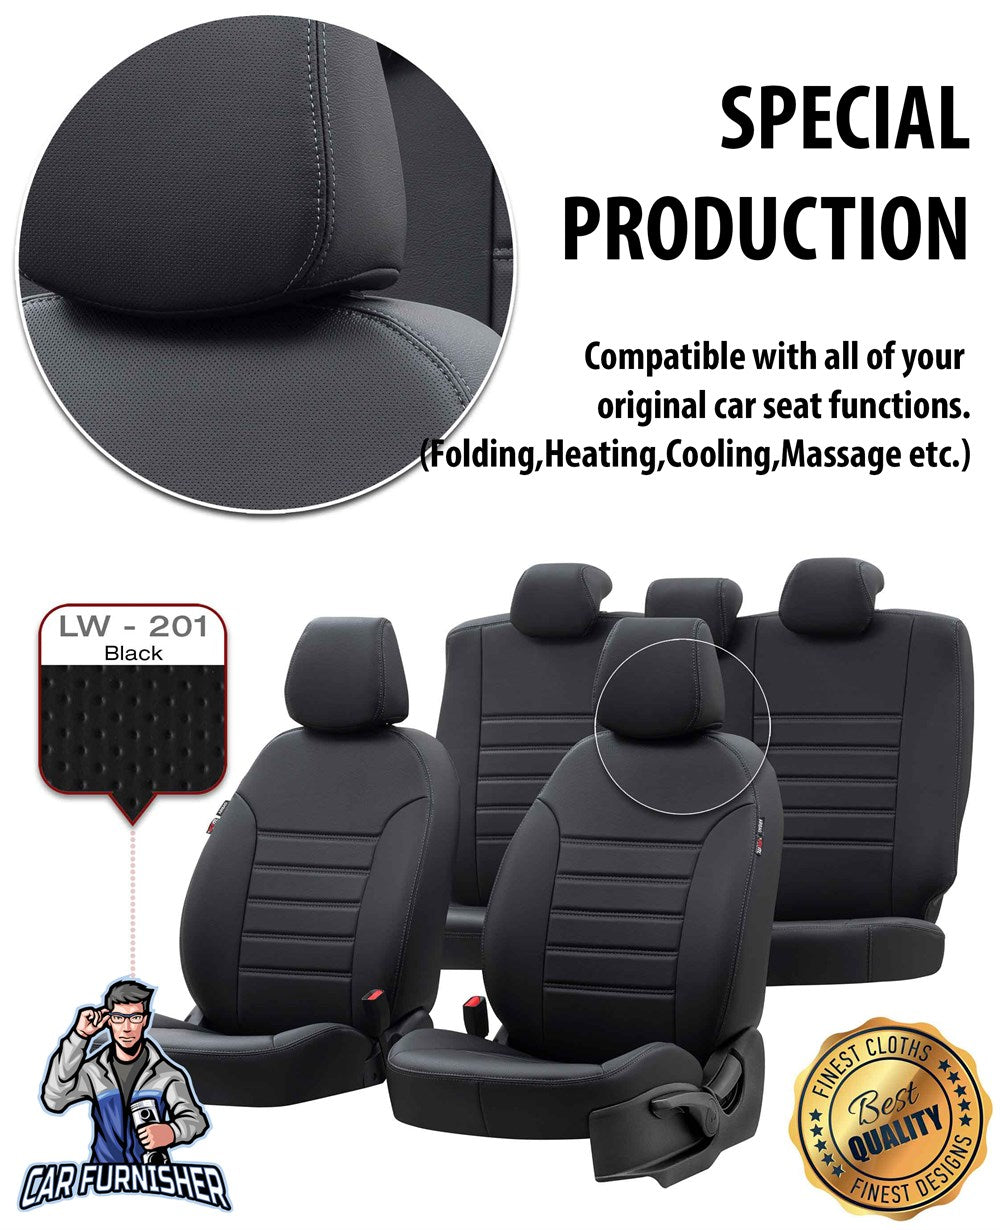 Seat Ibiza Seat Covers Istanbul Leather Design Black Leather